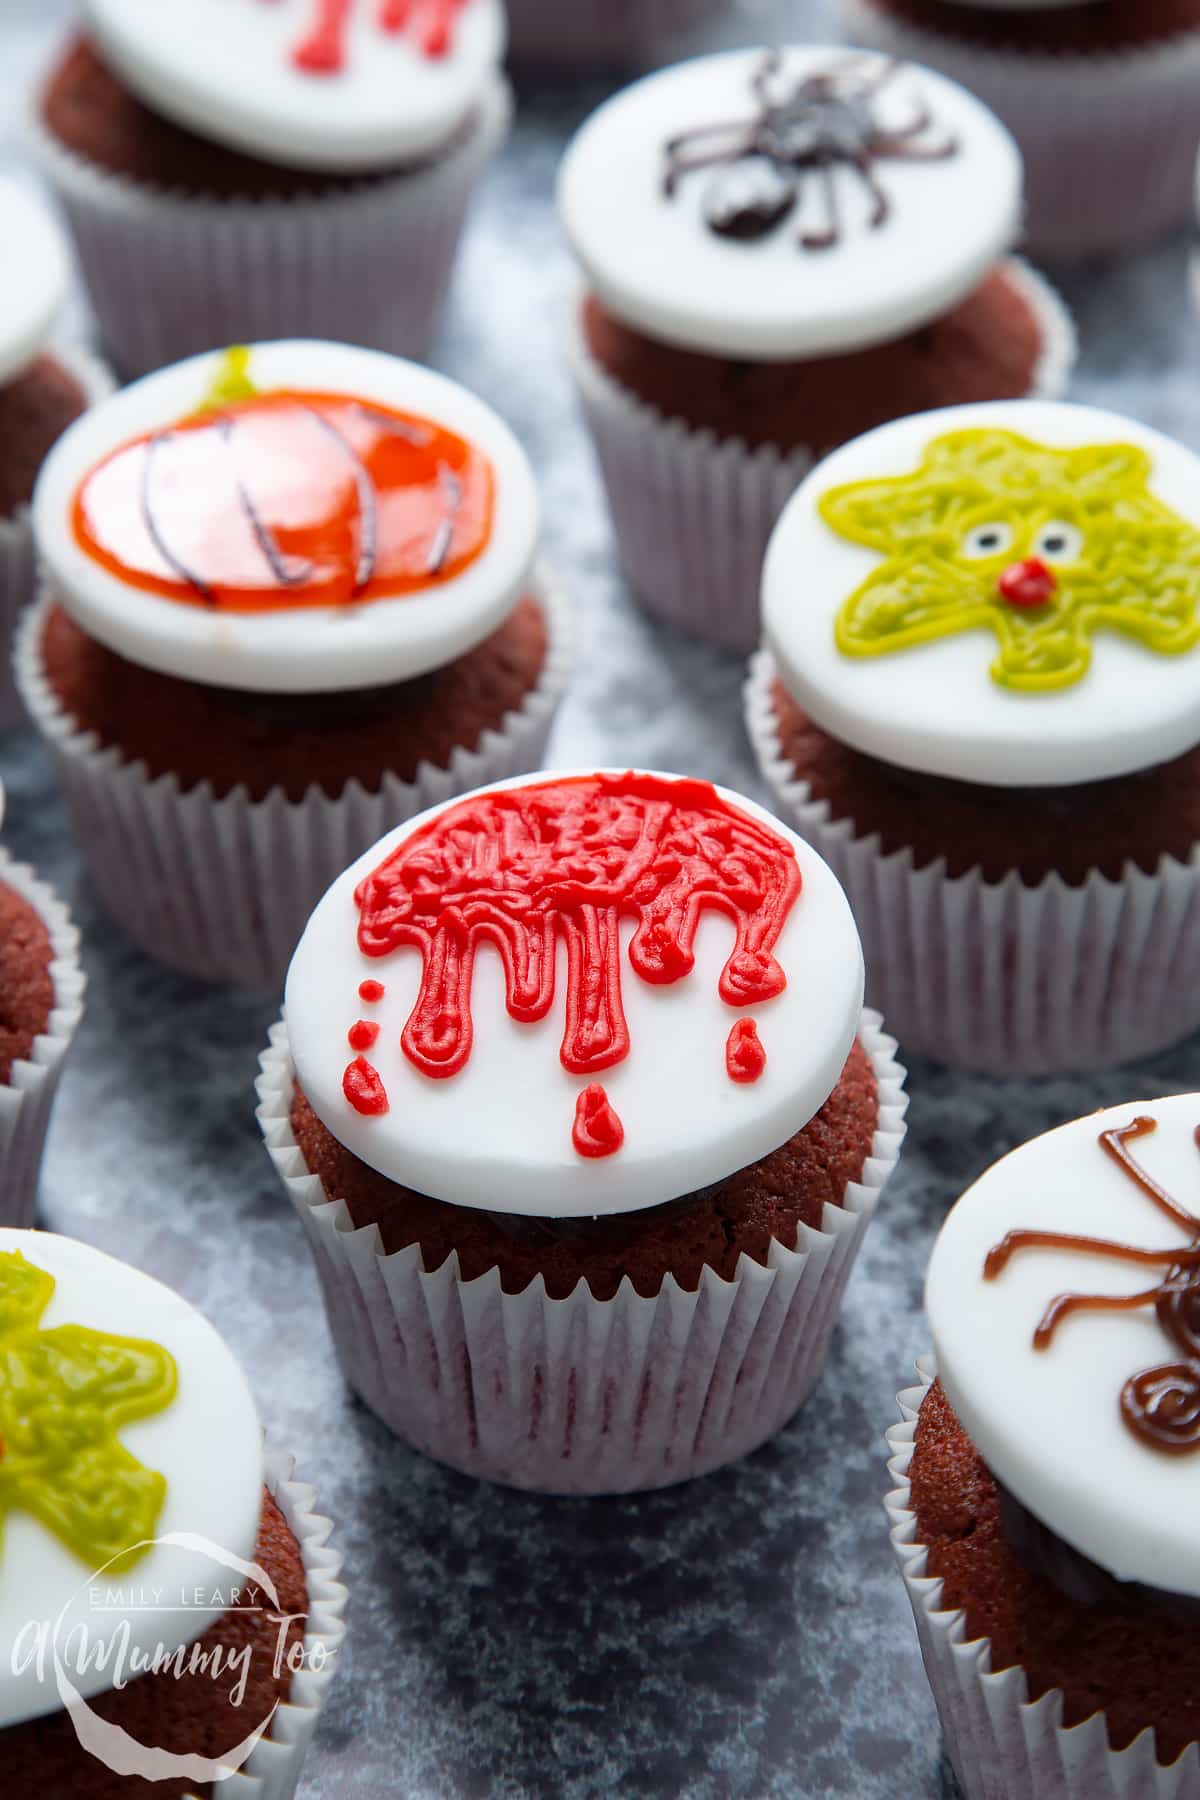 Dairy free Halloween cupcakes: red velvet cupcakes topped with chocolate frosting and white fondant discs decorated with icing pens. The cupcake in the foreground has a dripping blood design.